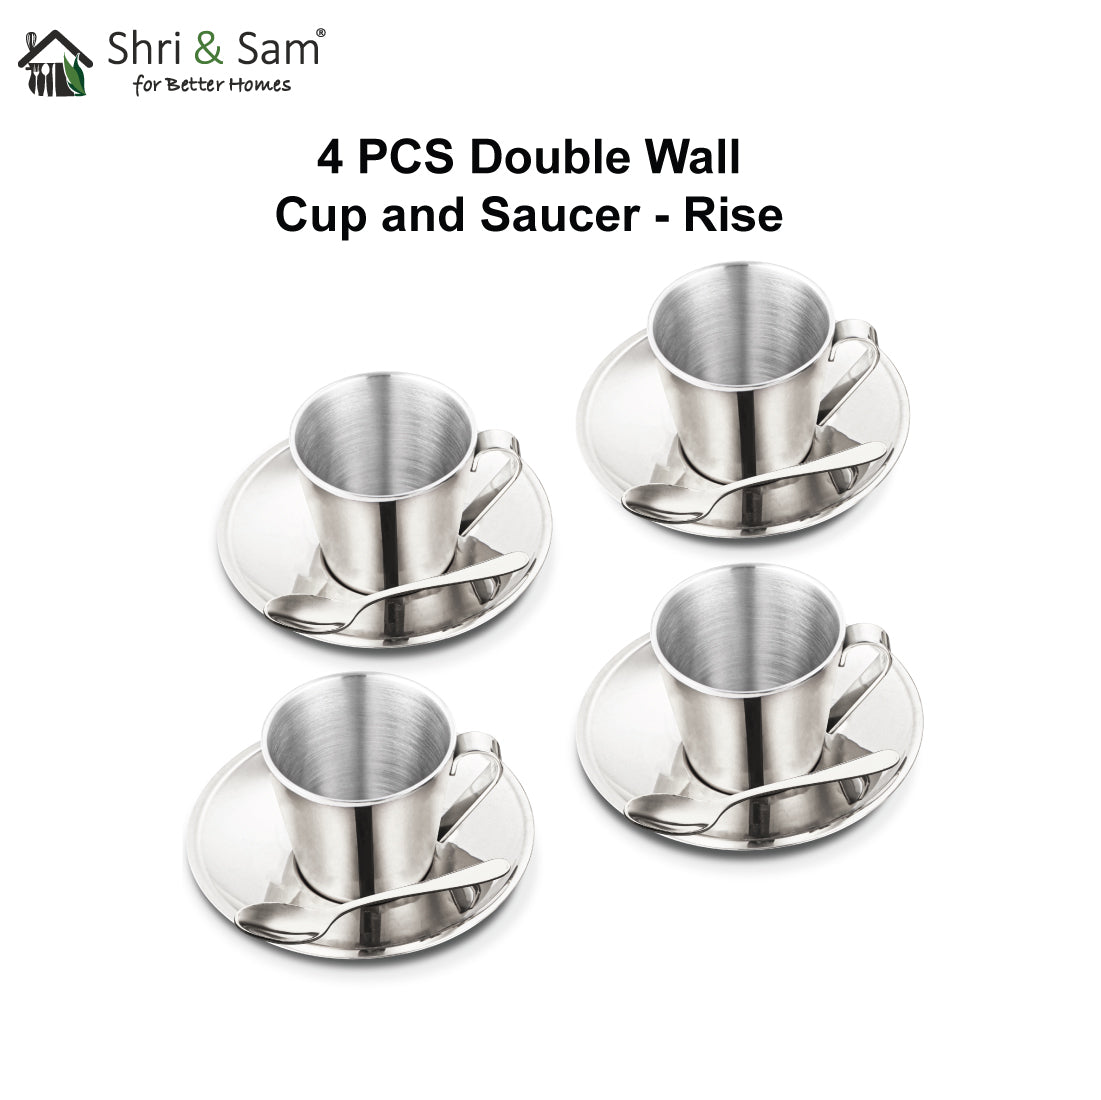 Stainless Steel 4 PCS Double Wall Cup and Saucer Rise